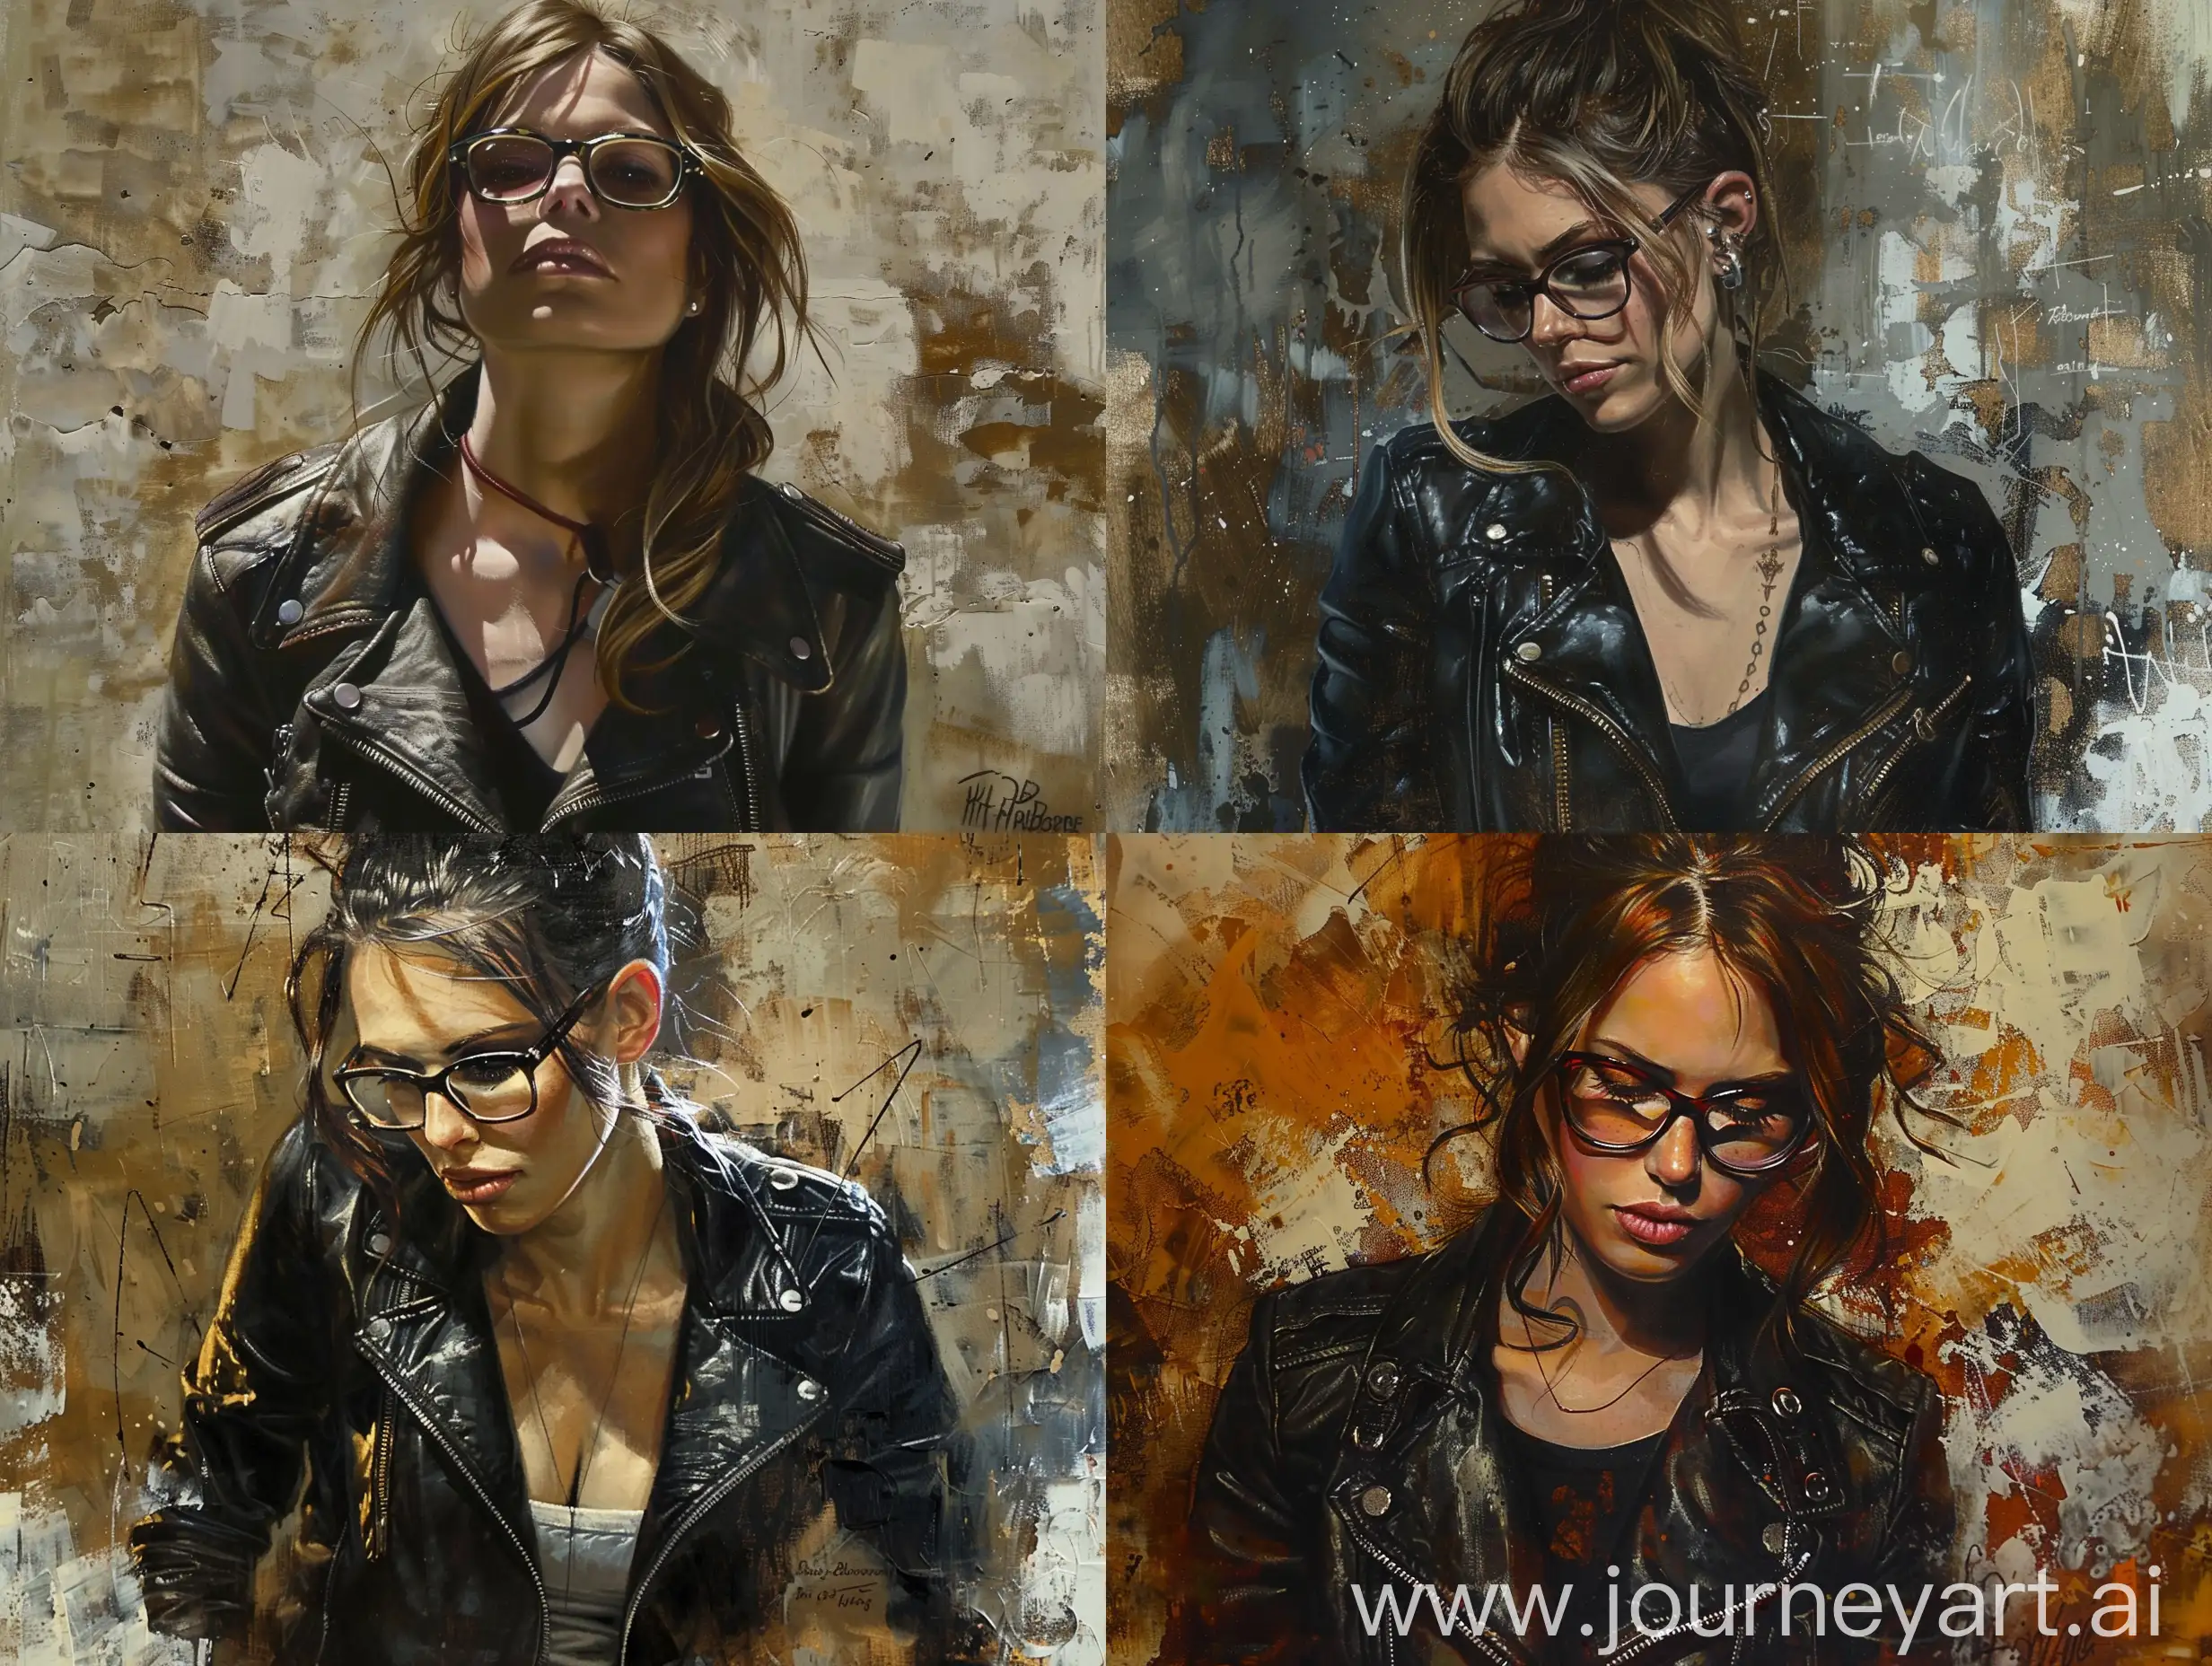 a painting of a woman wearing glasses and a leather jacket, style of raymond swanland, by Raymond Swanland, russ mills, by Tim Okamura, by Pascal Dagnan-Bouveret, jonathan yeo painting, by Sam Spratt, by David Garner, by William Berra, artist artgerm i and wlop, phil hale artwork, by Philip Absolon